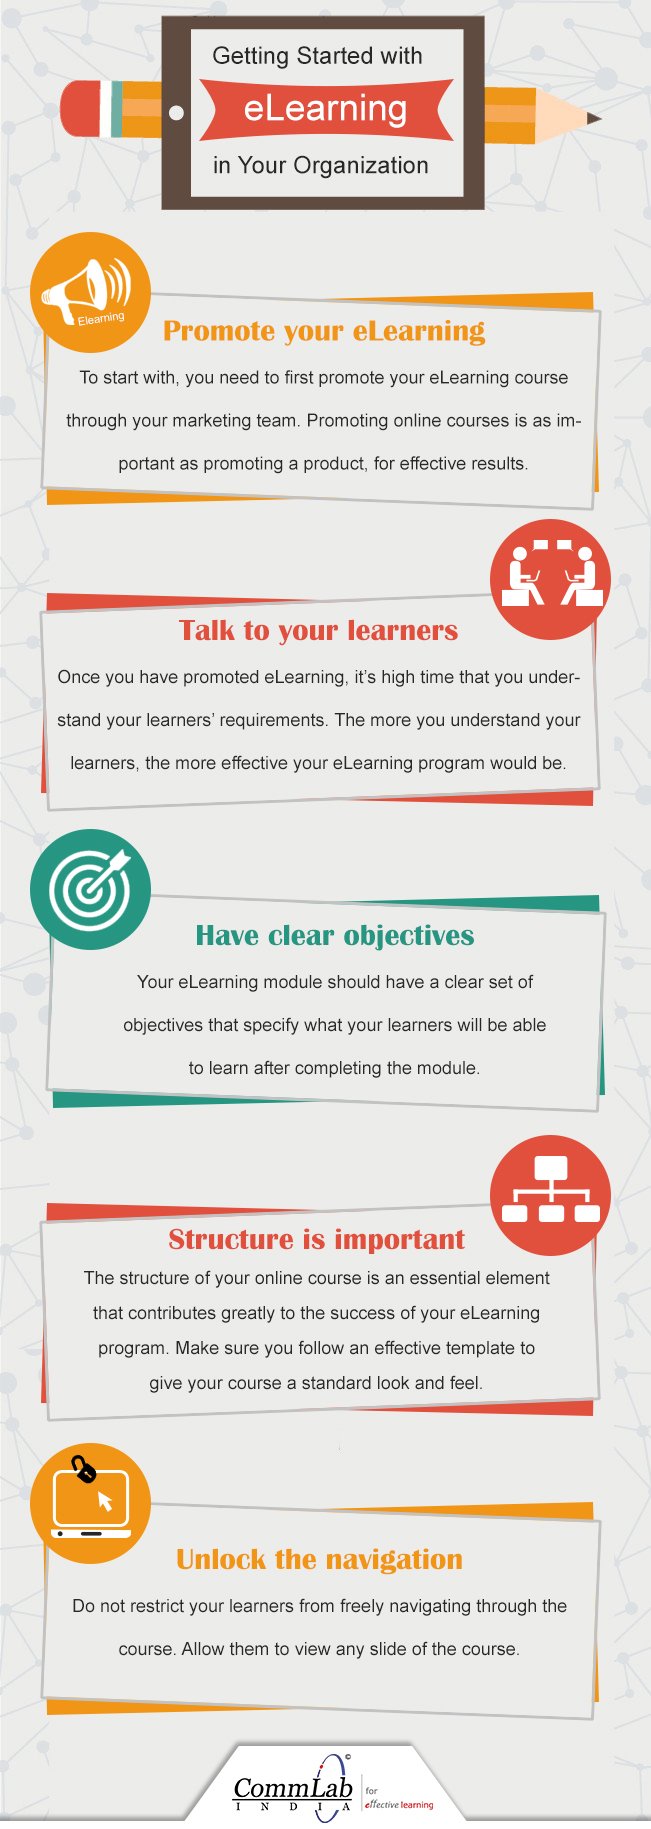 Getting Started with E-learning in Your Organization – An Infographic